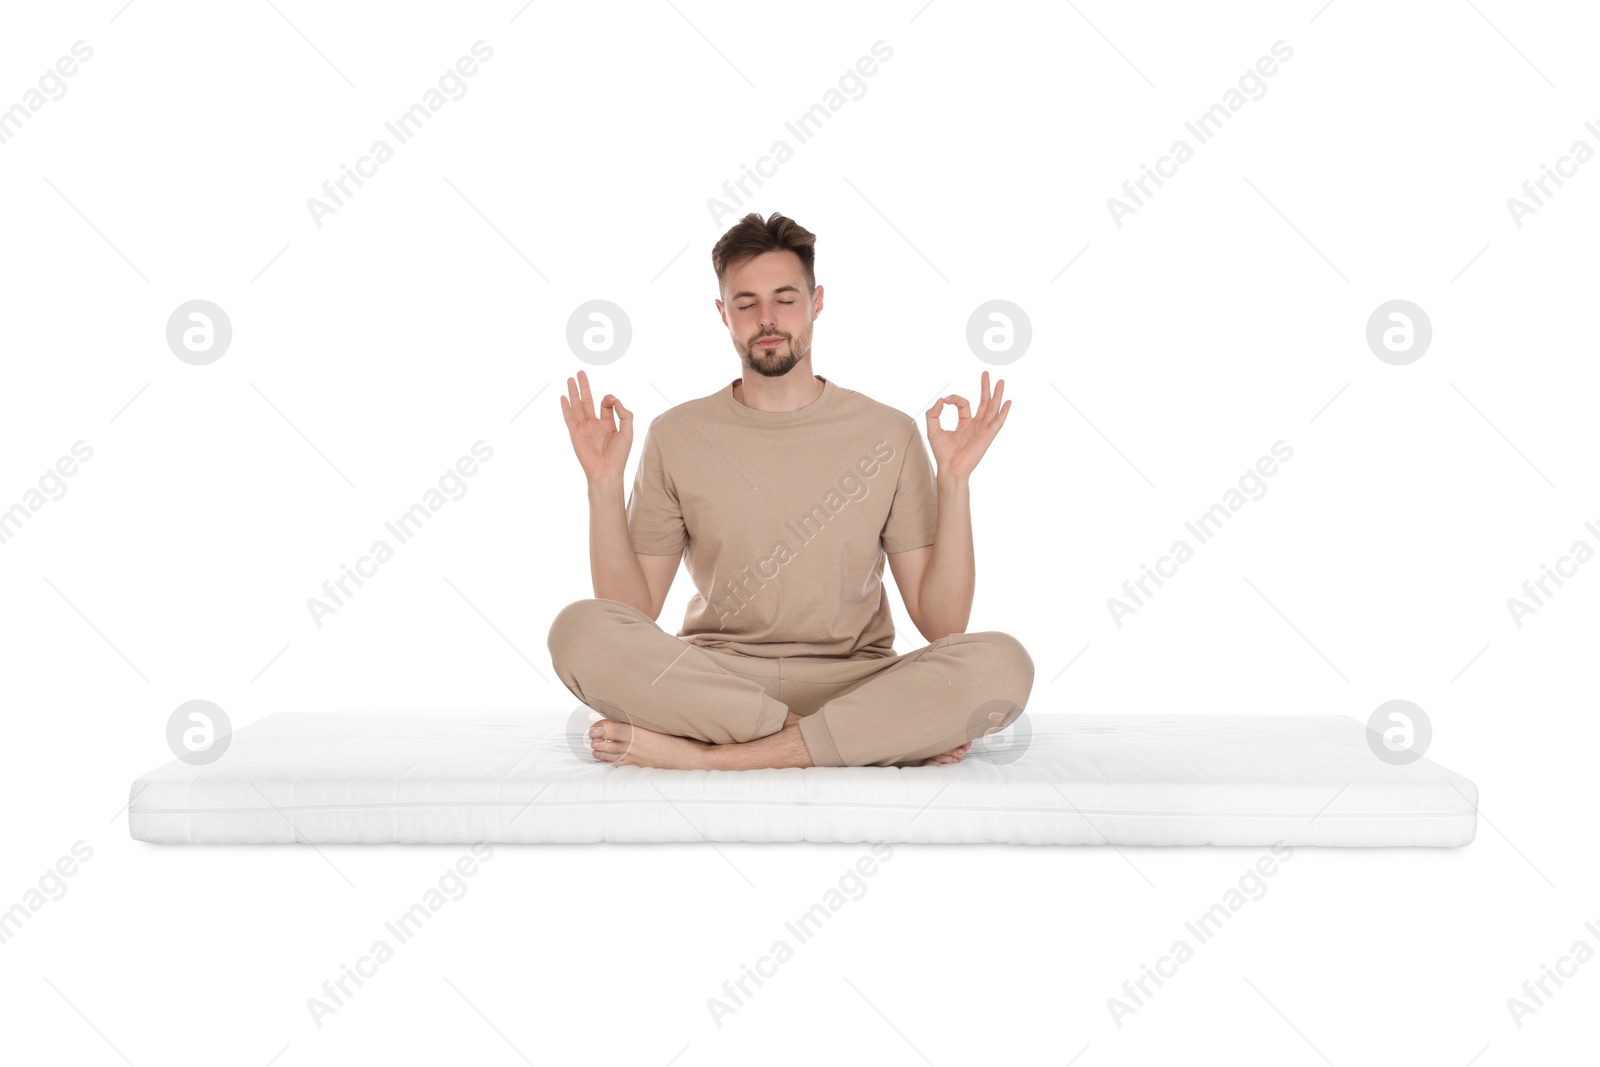 Photo of Man sitting on soft mattress and meditating against white background